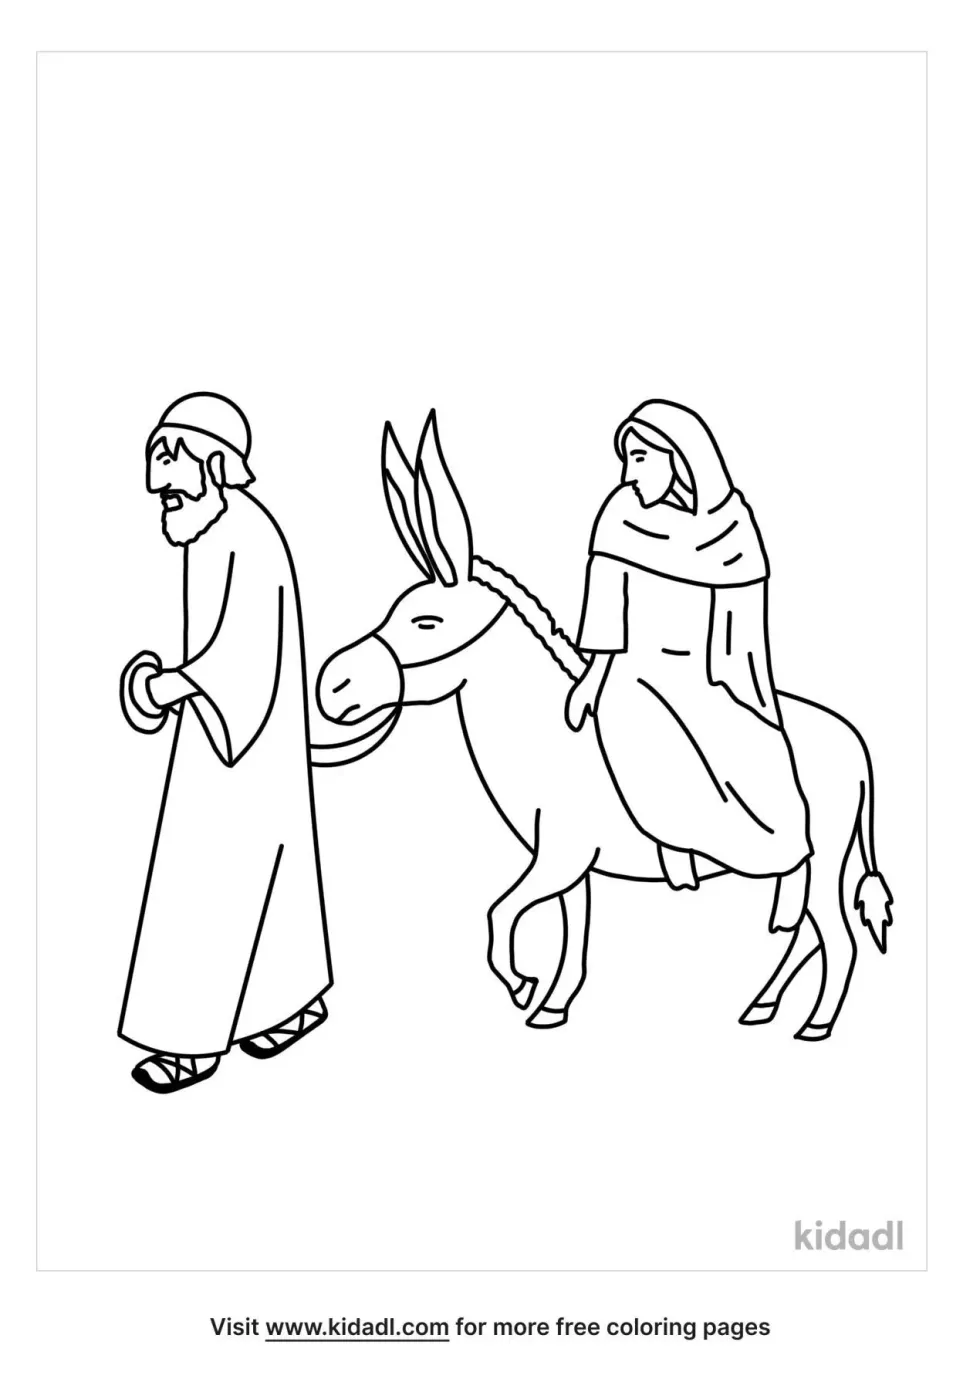 The Donkey Carried Mary